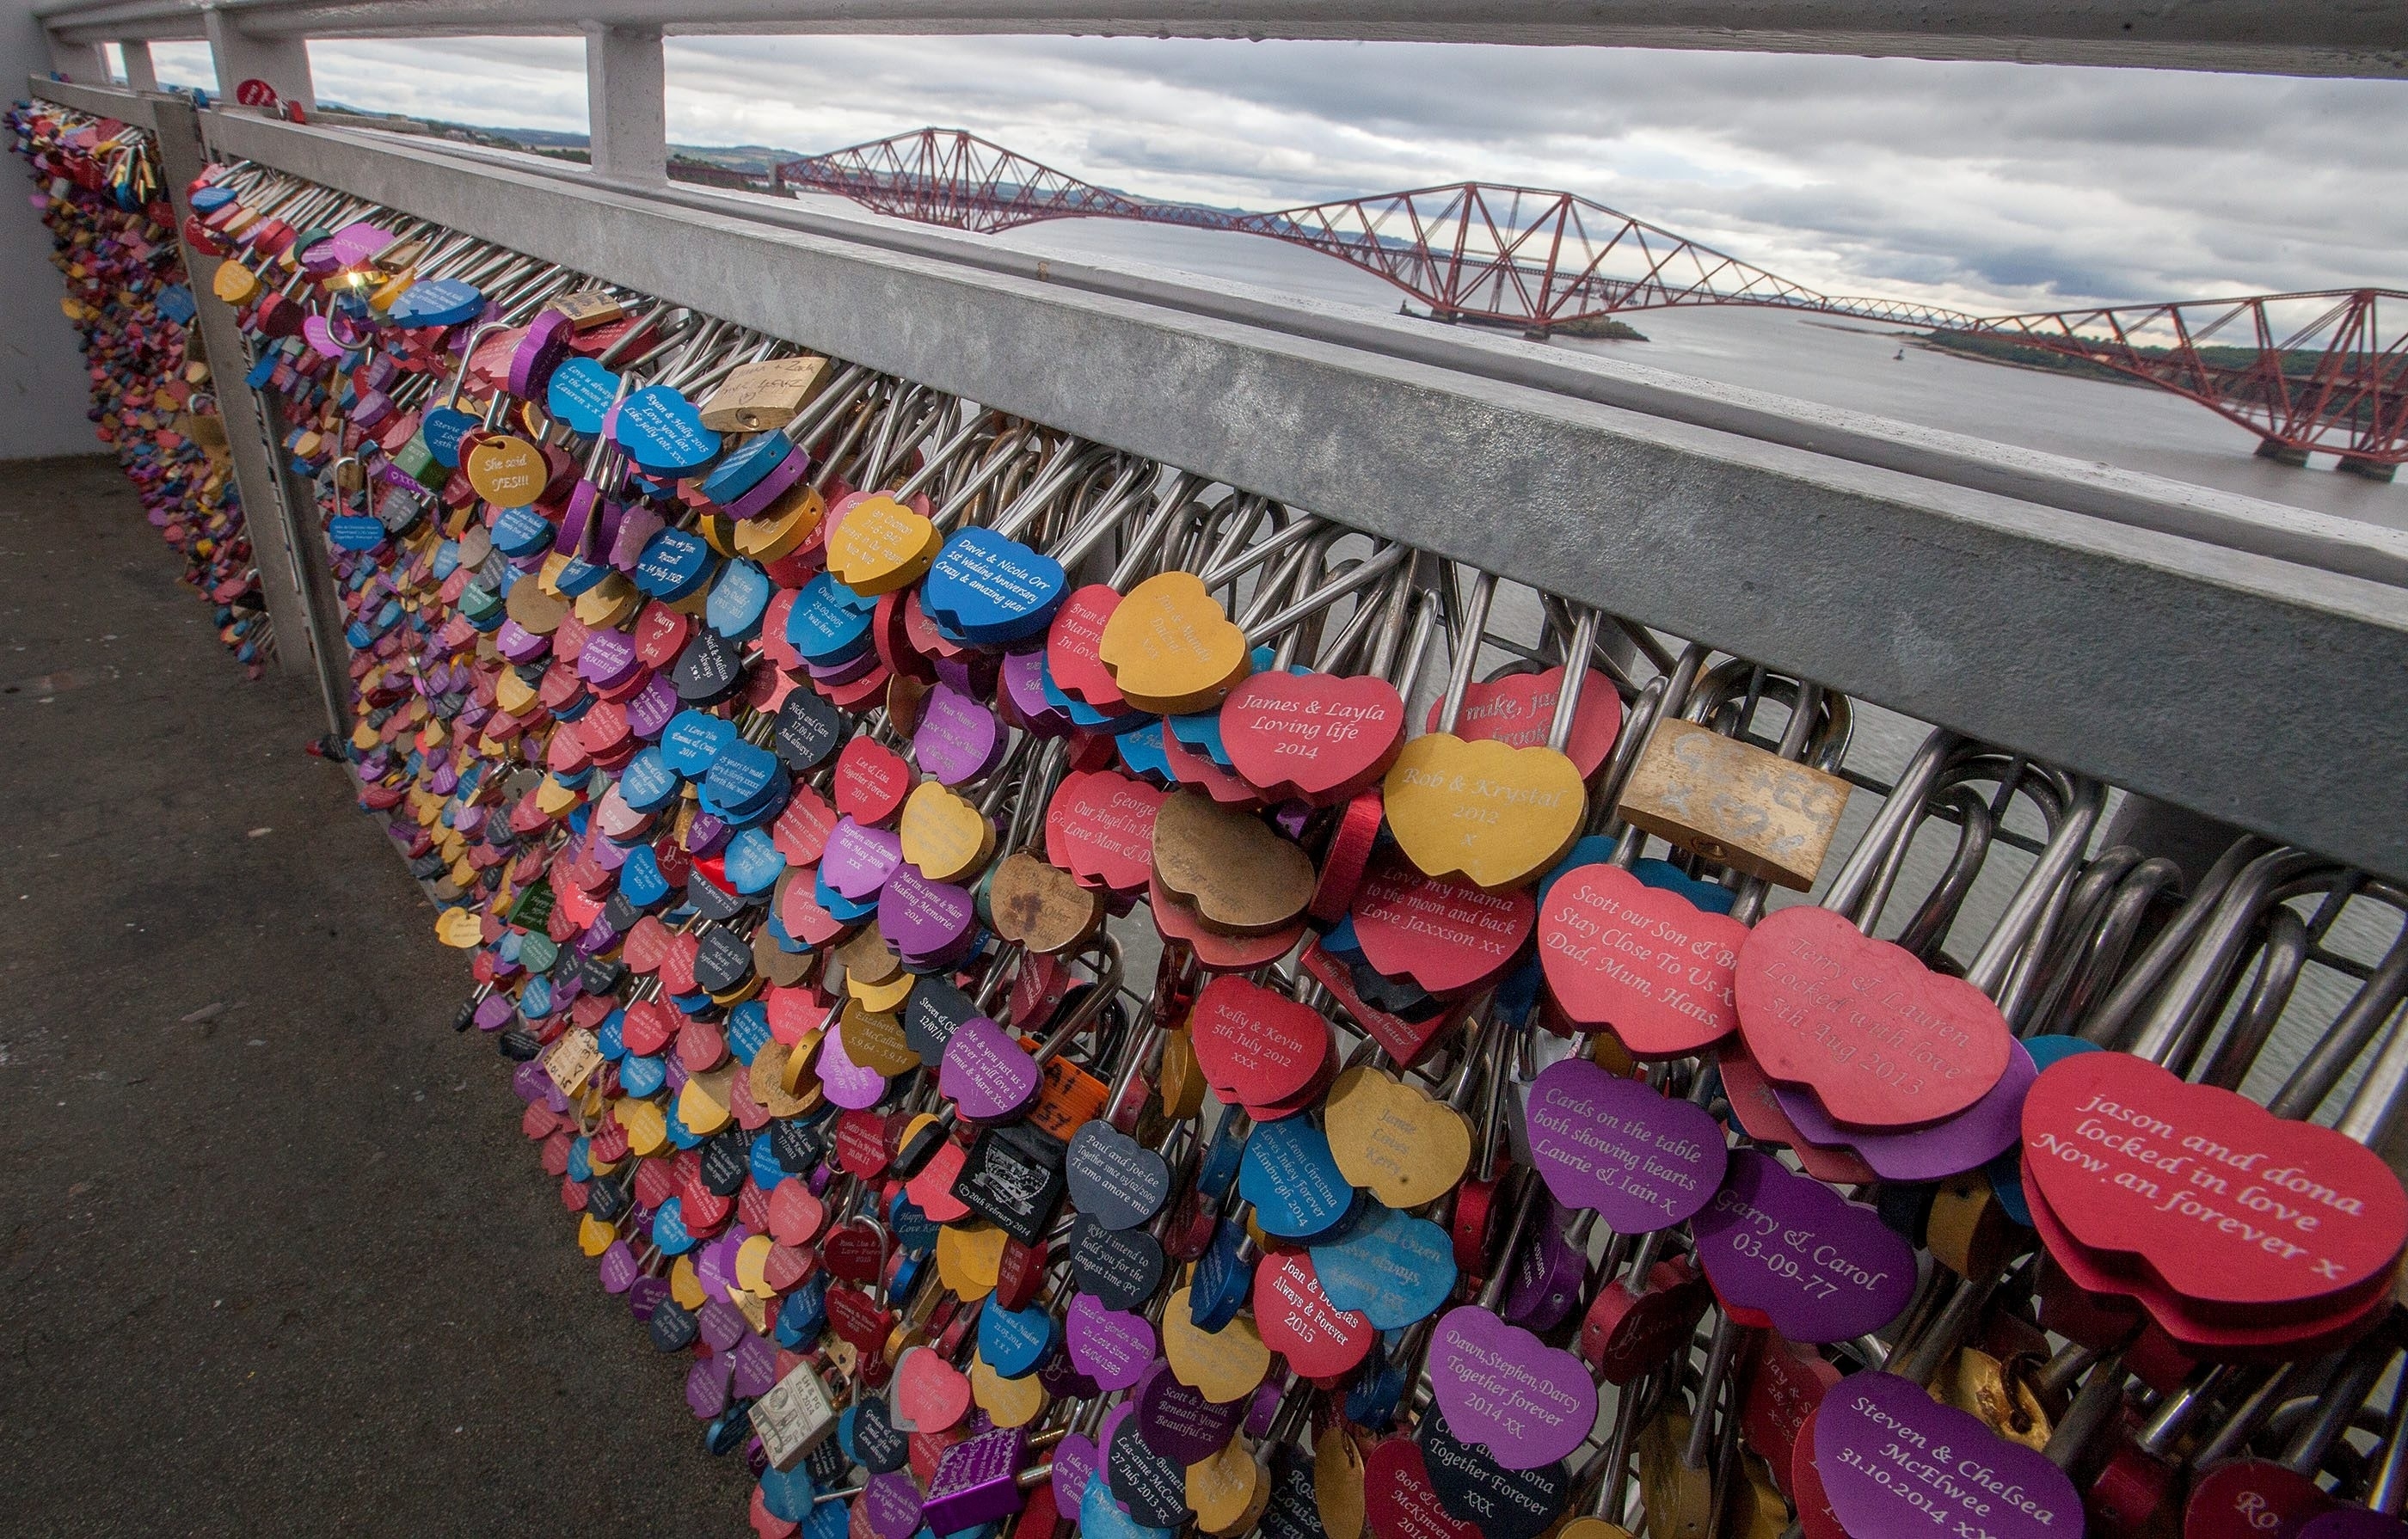 Influenced by bridges in Florence, Italy and Paris, France, the scheme was dreamed up by  the Mark Your Spot project, inviting couples to lock their love on the Forth Road Bridge.